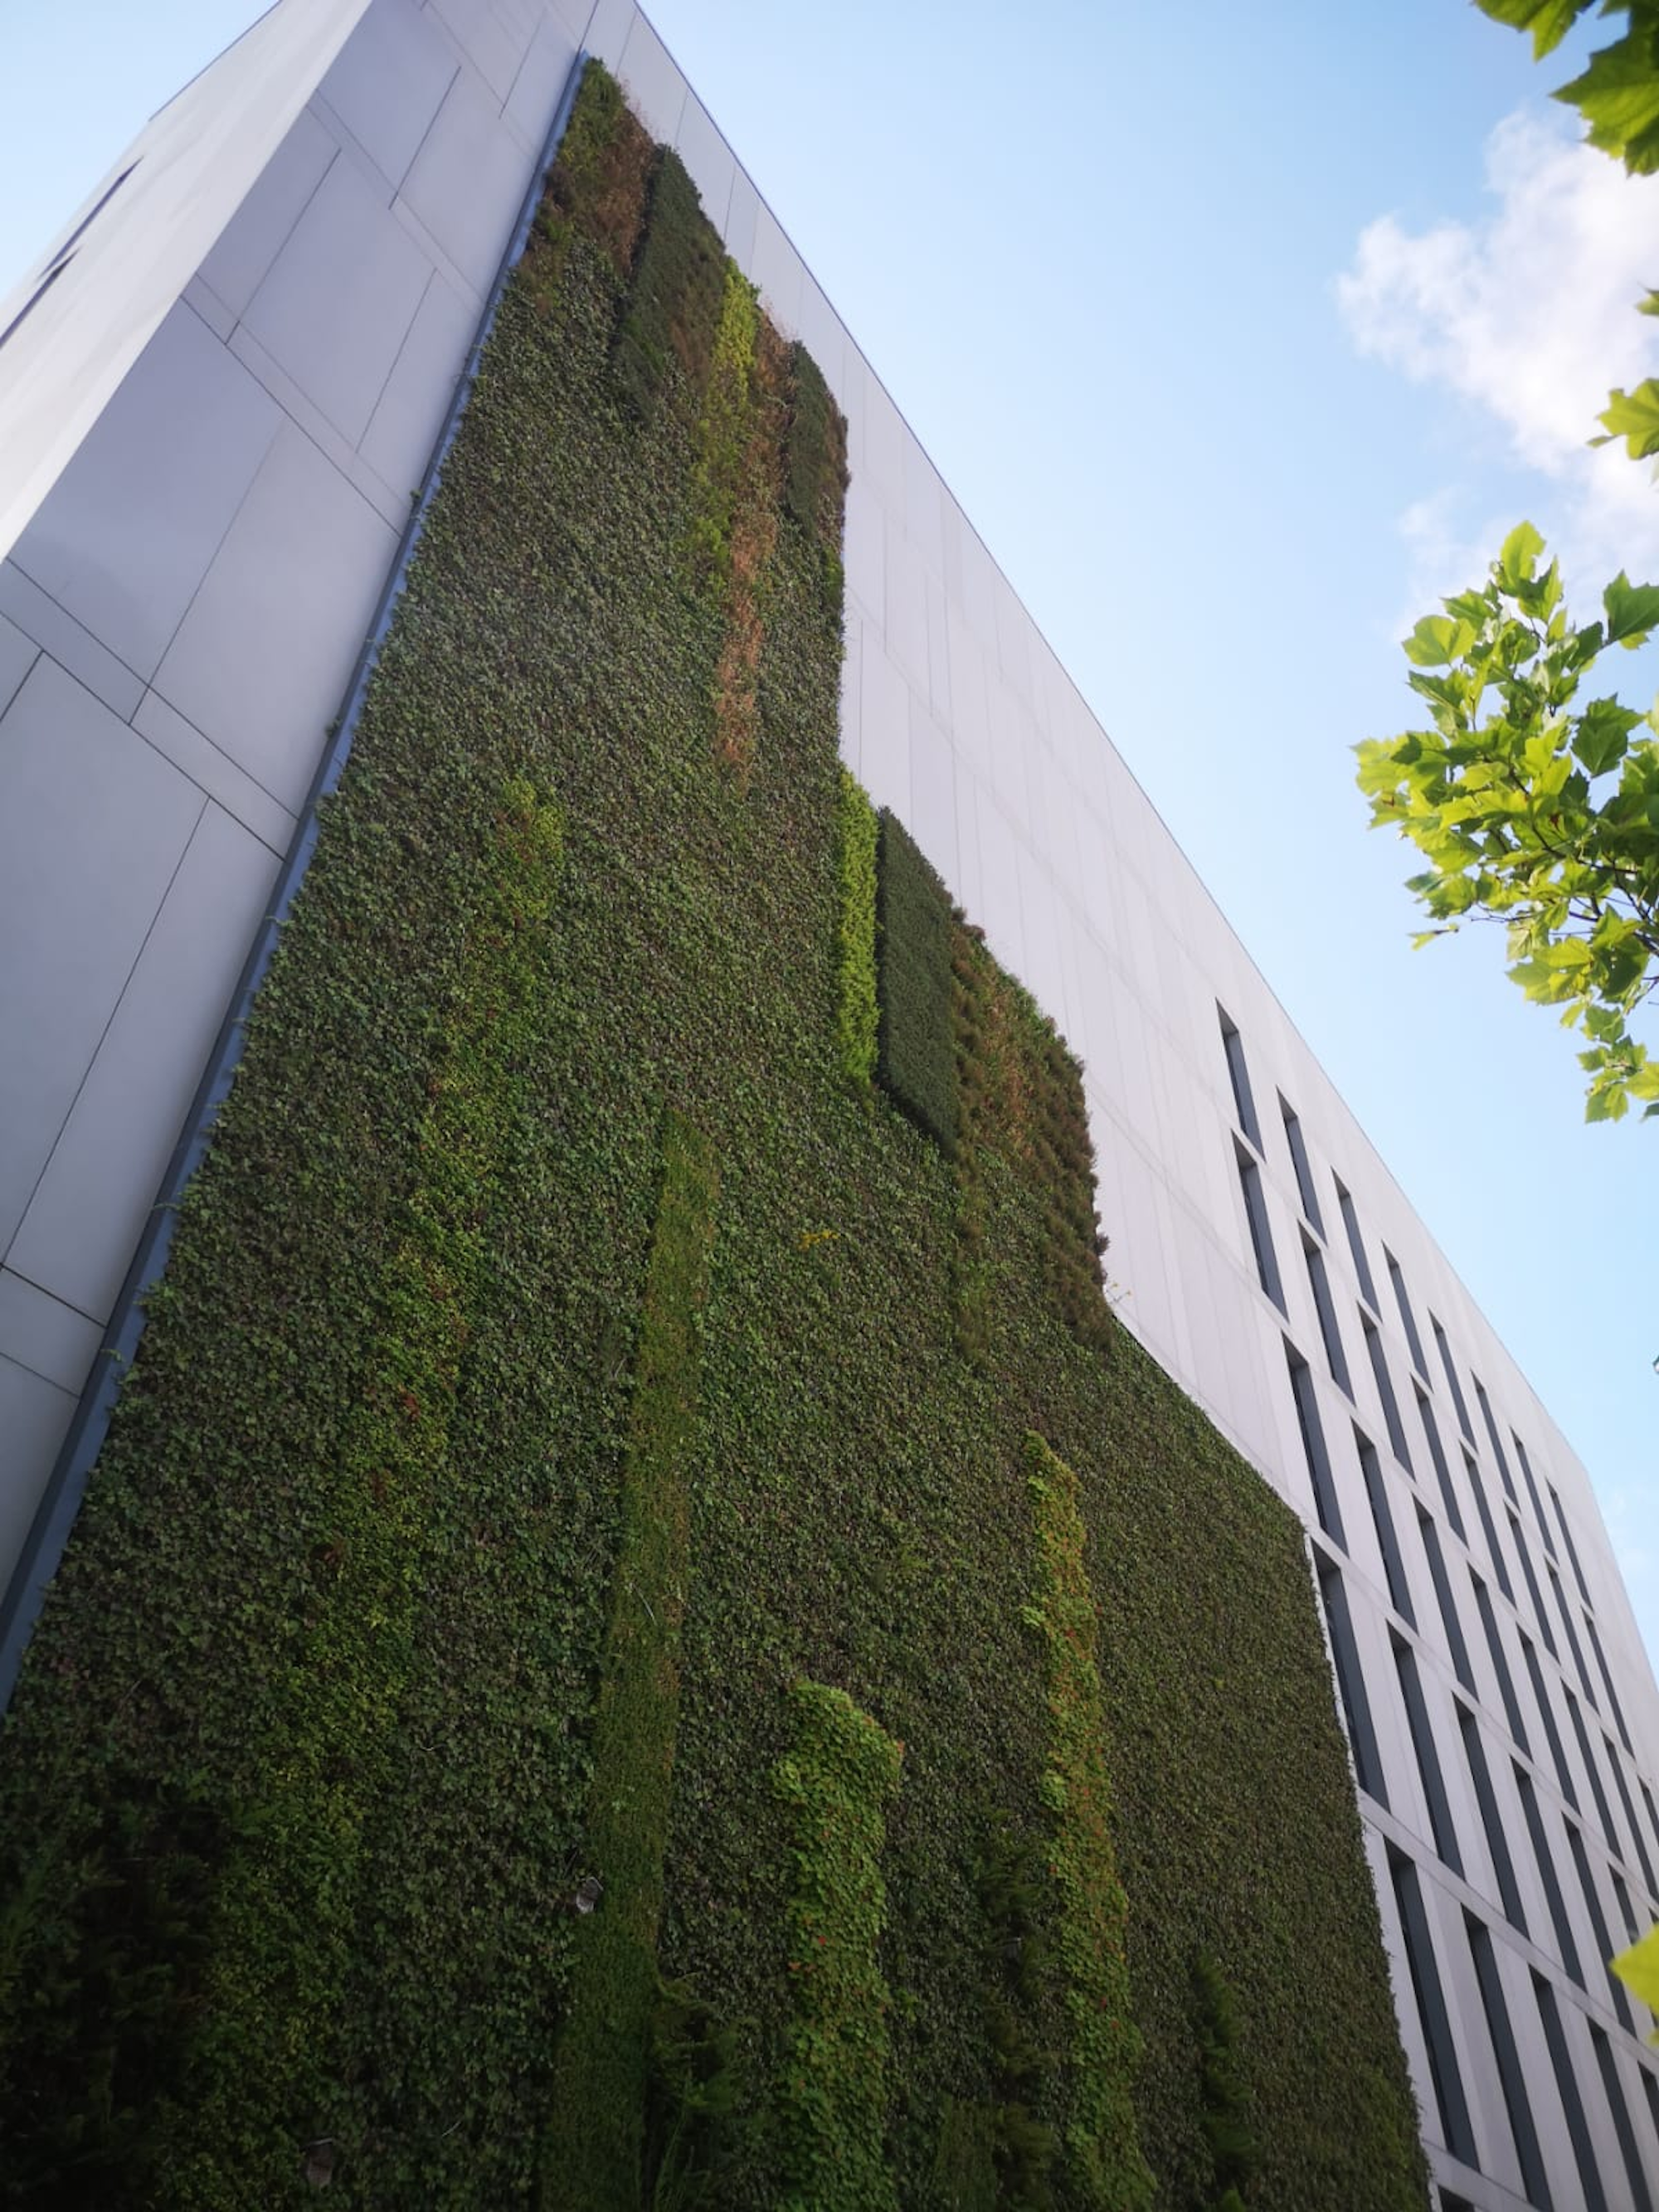 Living Wall At Newcastle's Science Central Building With Bee Hives and Bird Boxes